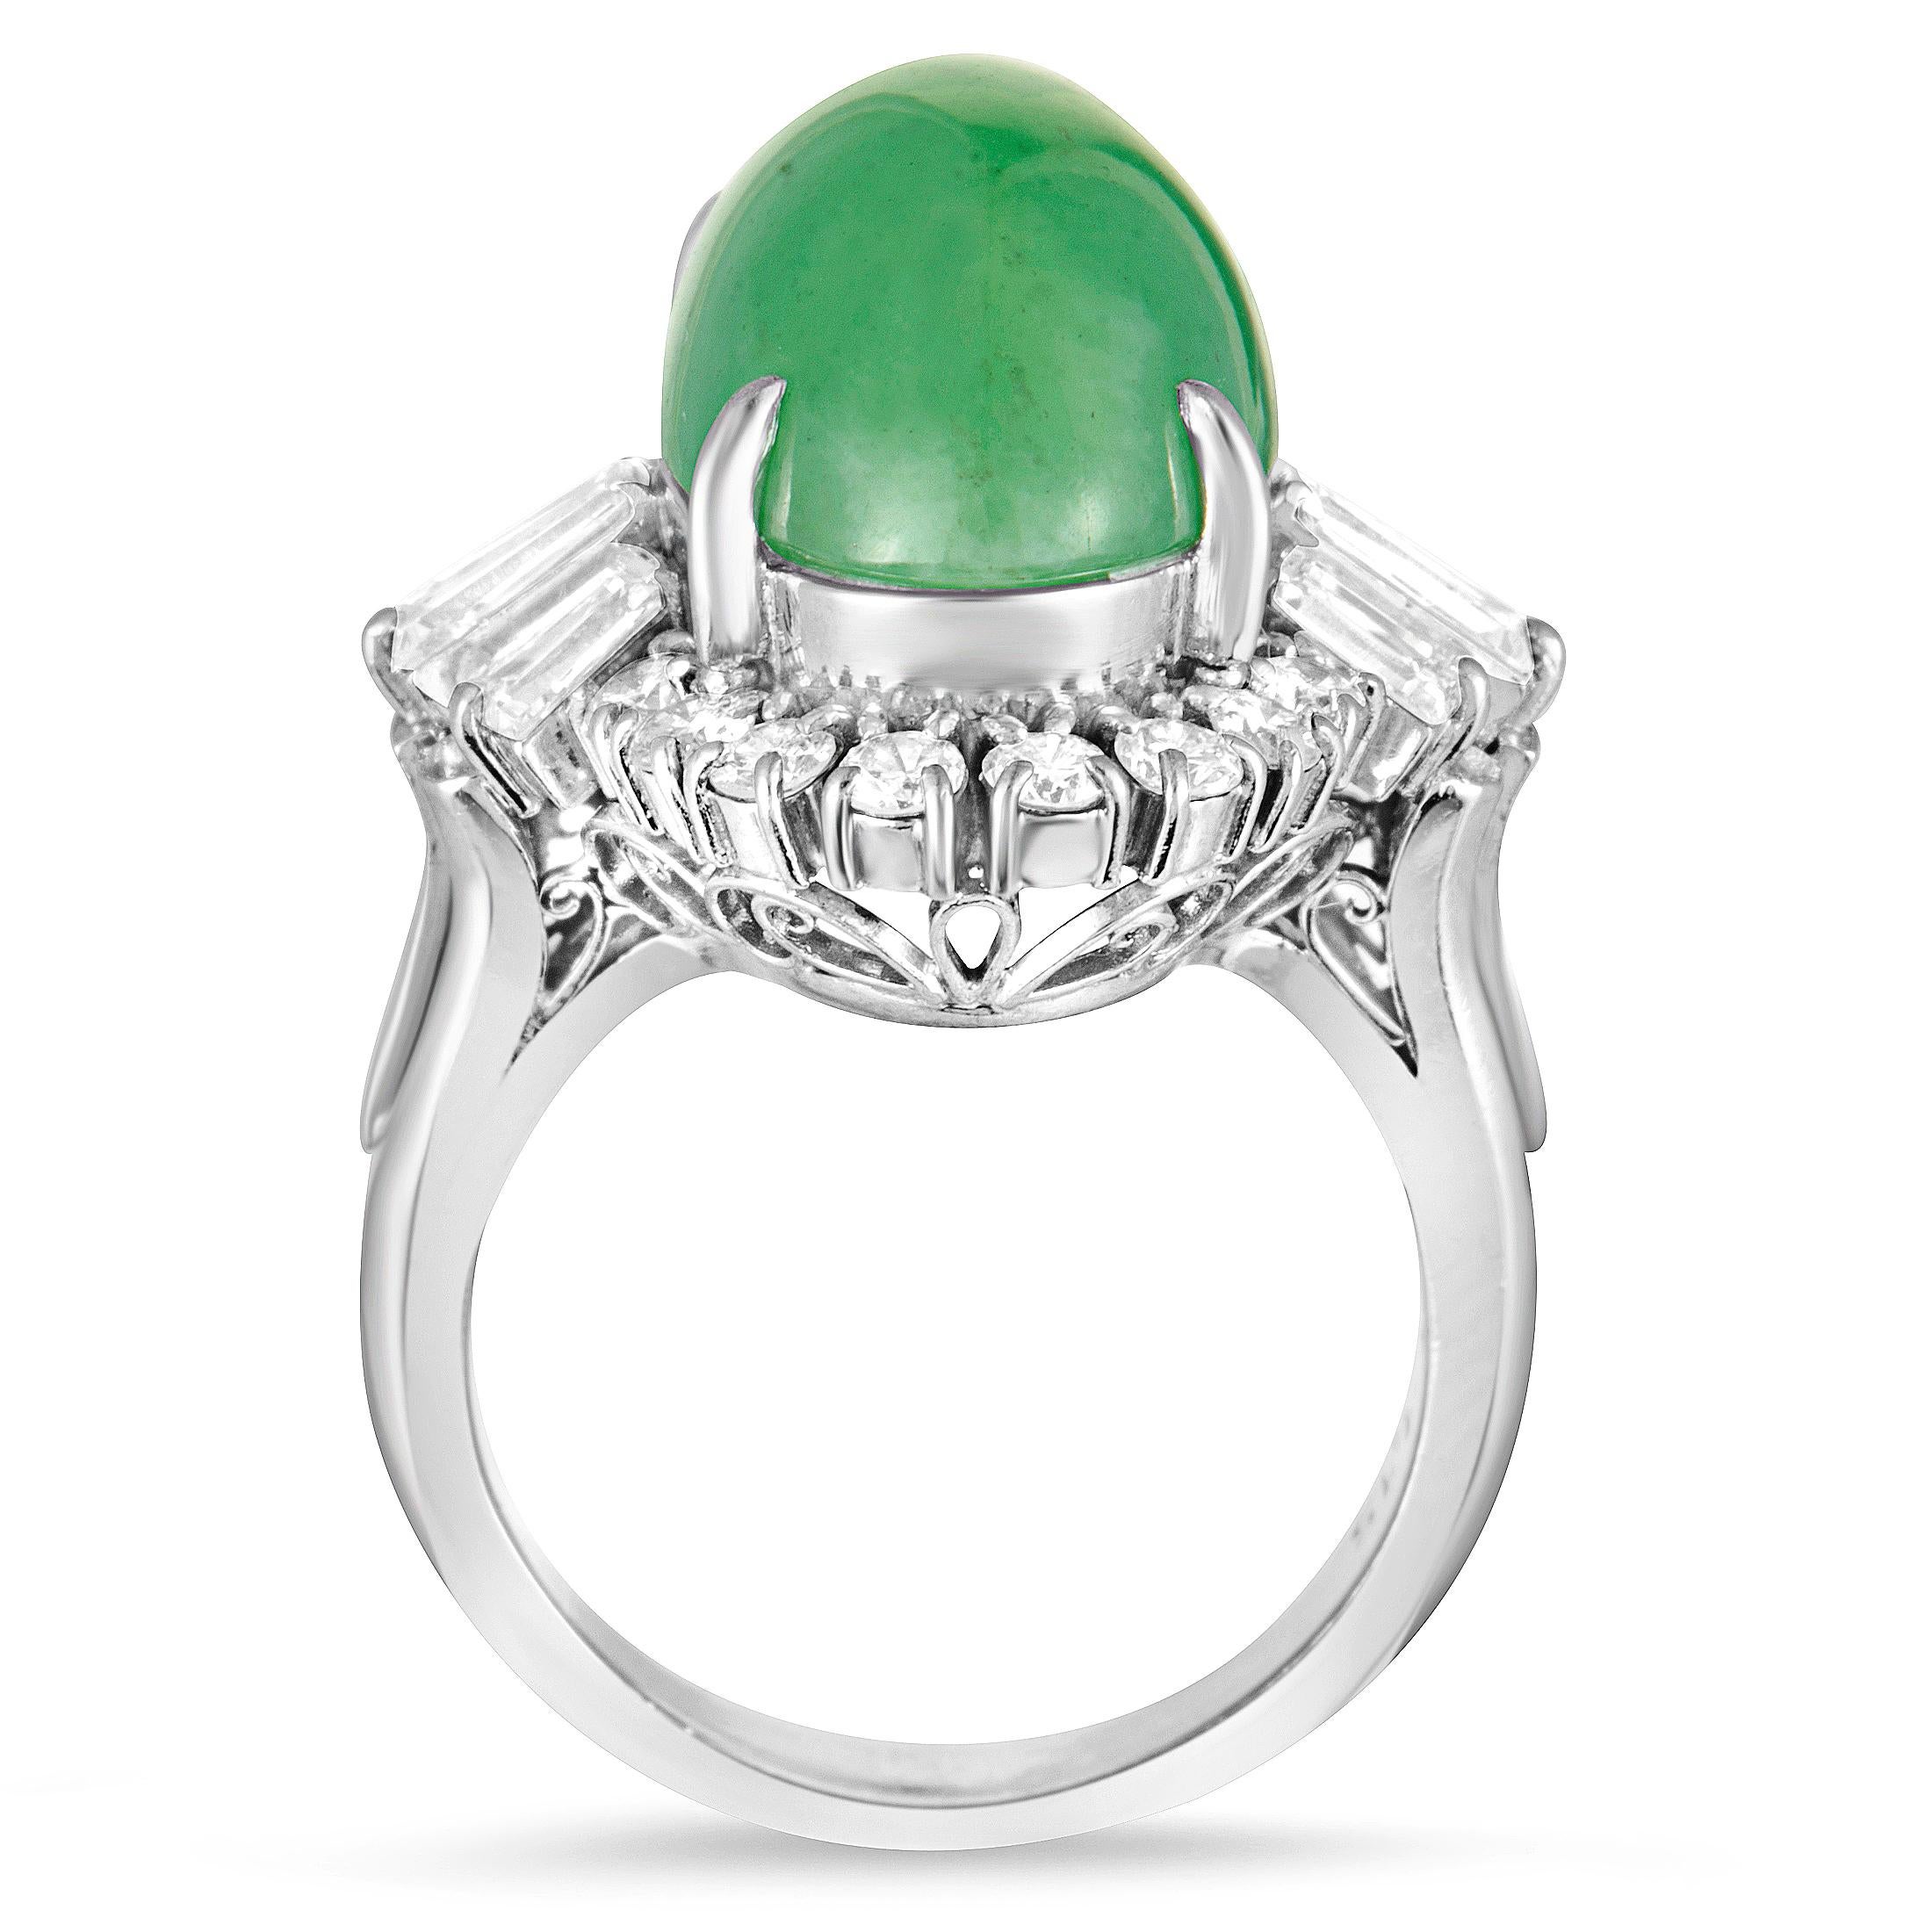 Standing out amidst a plethora of resplendent diamonds, the stunning green jade gives a compelling look to this magnificent ring. The ring is wonderfully made of platinum and it is set with a total of 1.15 carats of diamonds, while the jade weighs